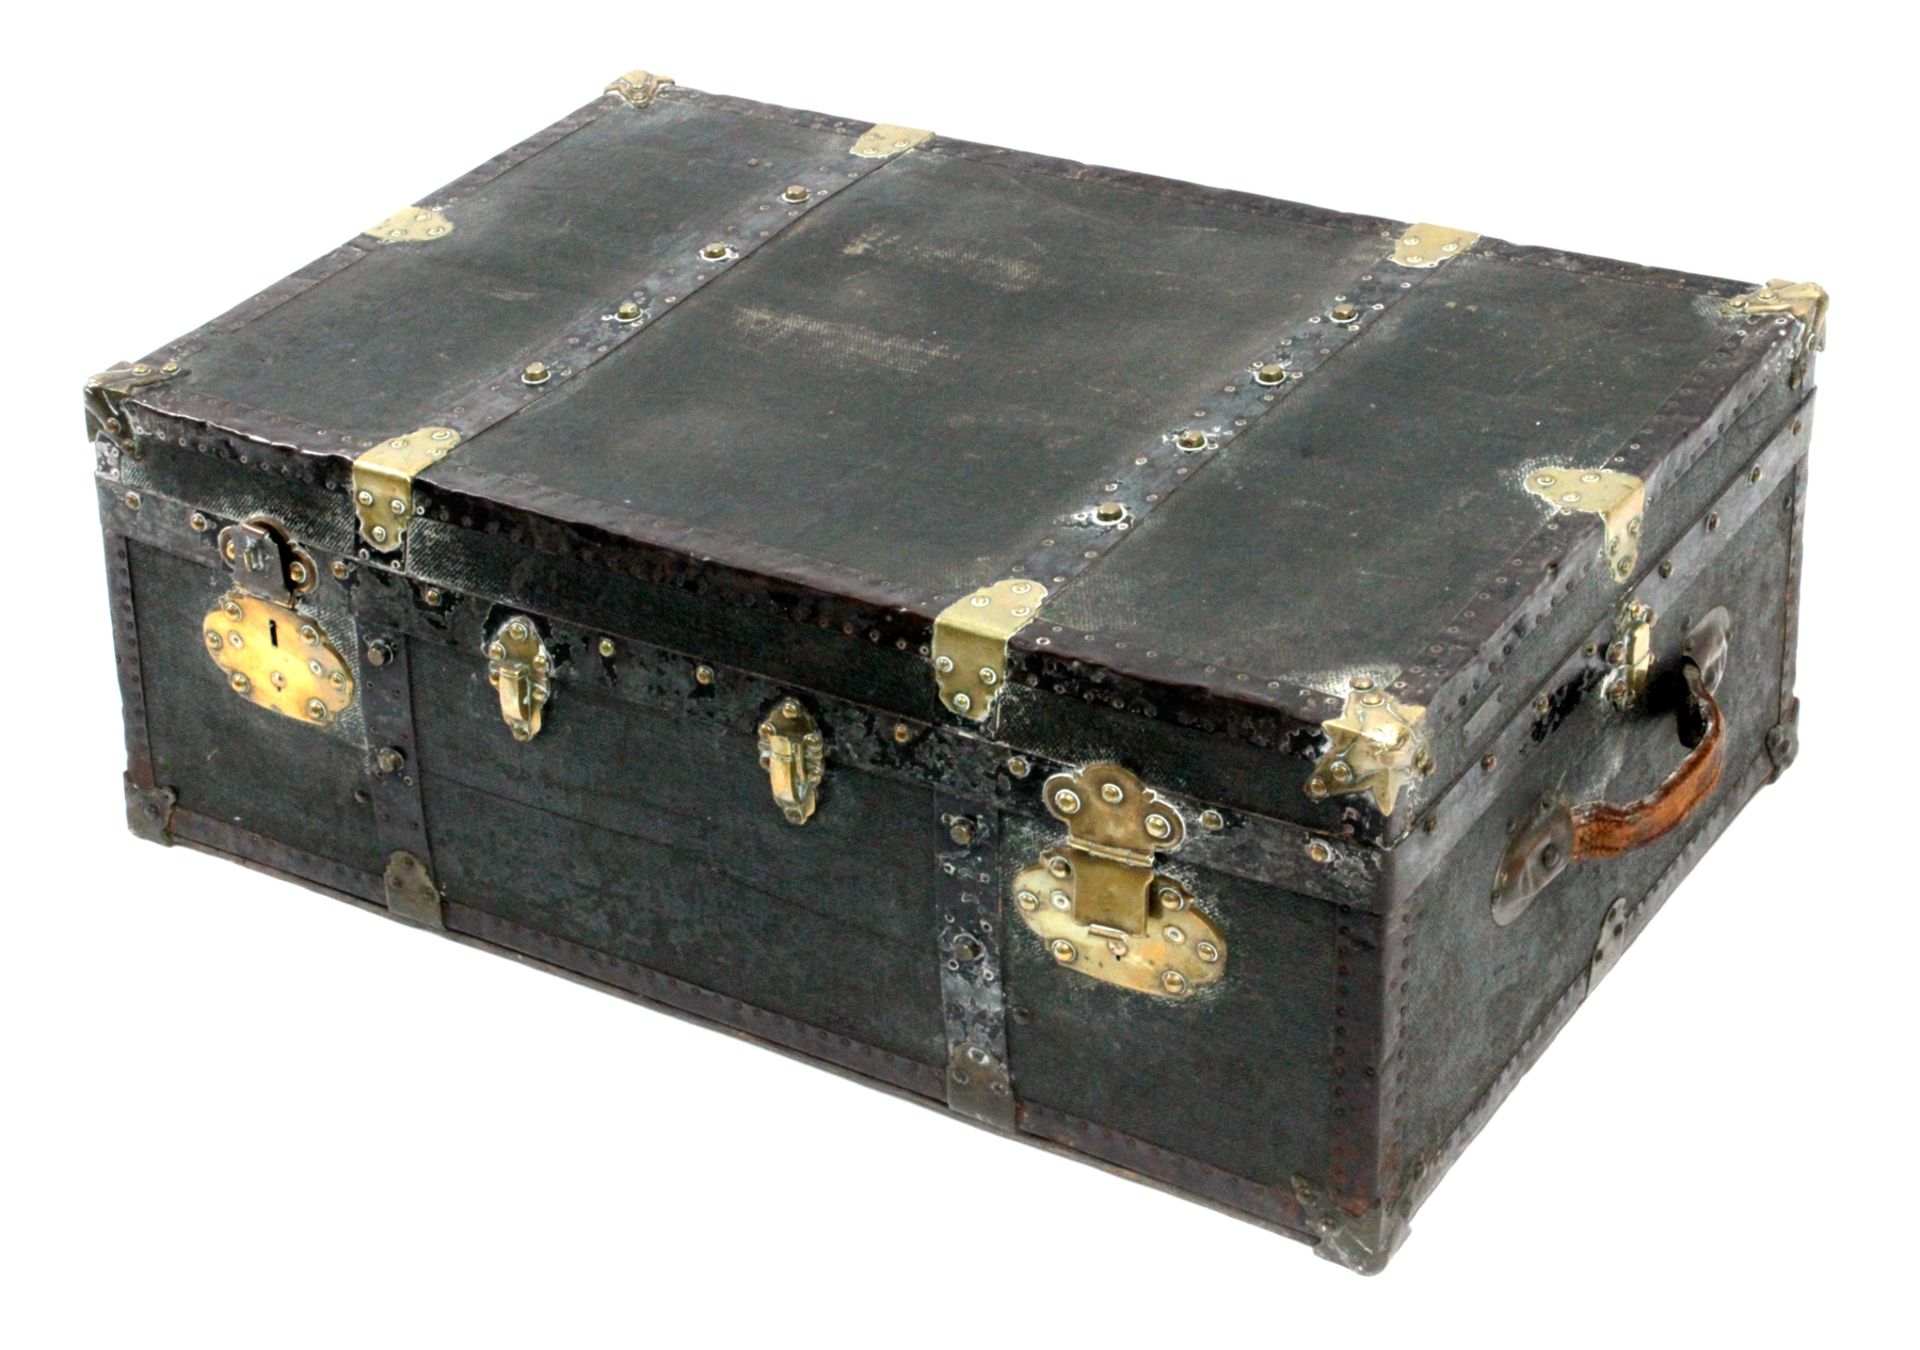 An early 20th century travel chest